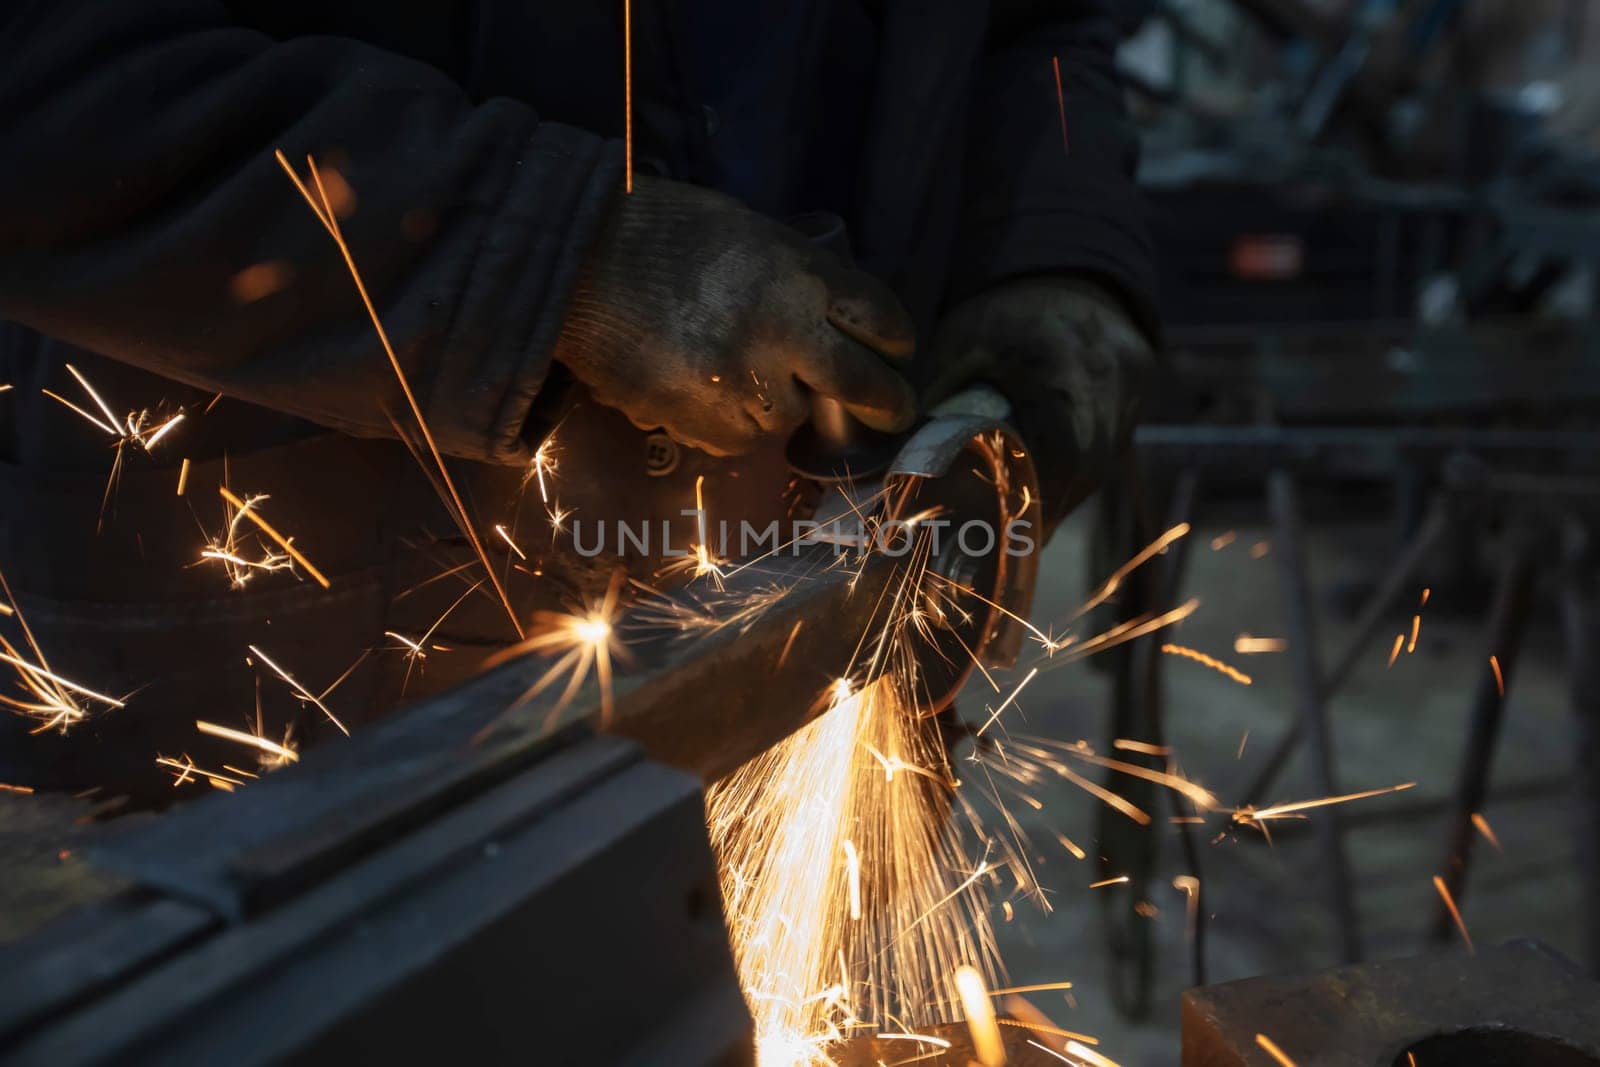 The grinder cuts iron and sparks of fire fly. by Sviatlana